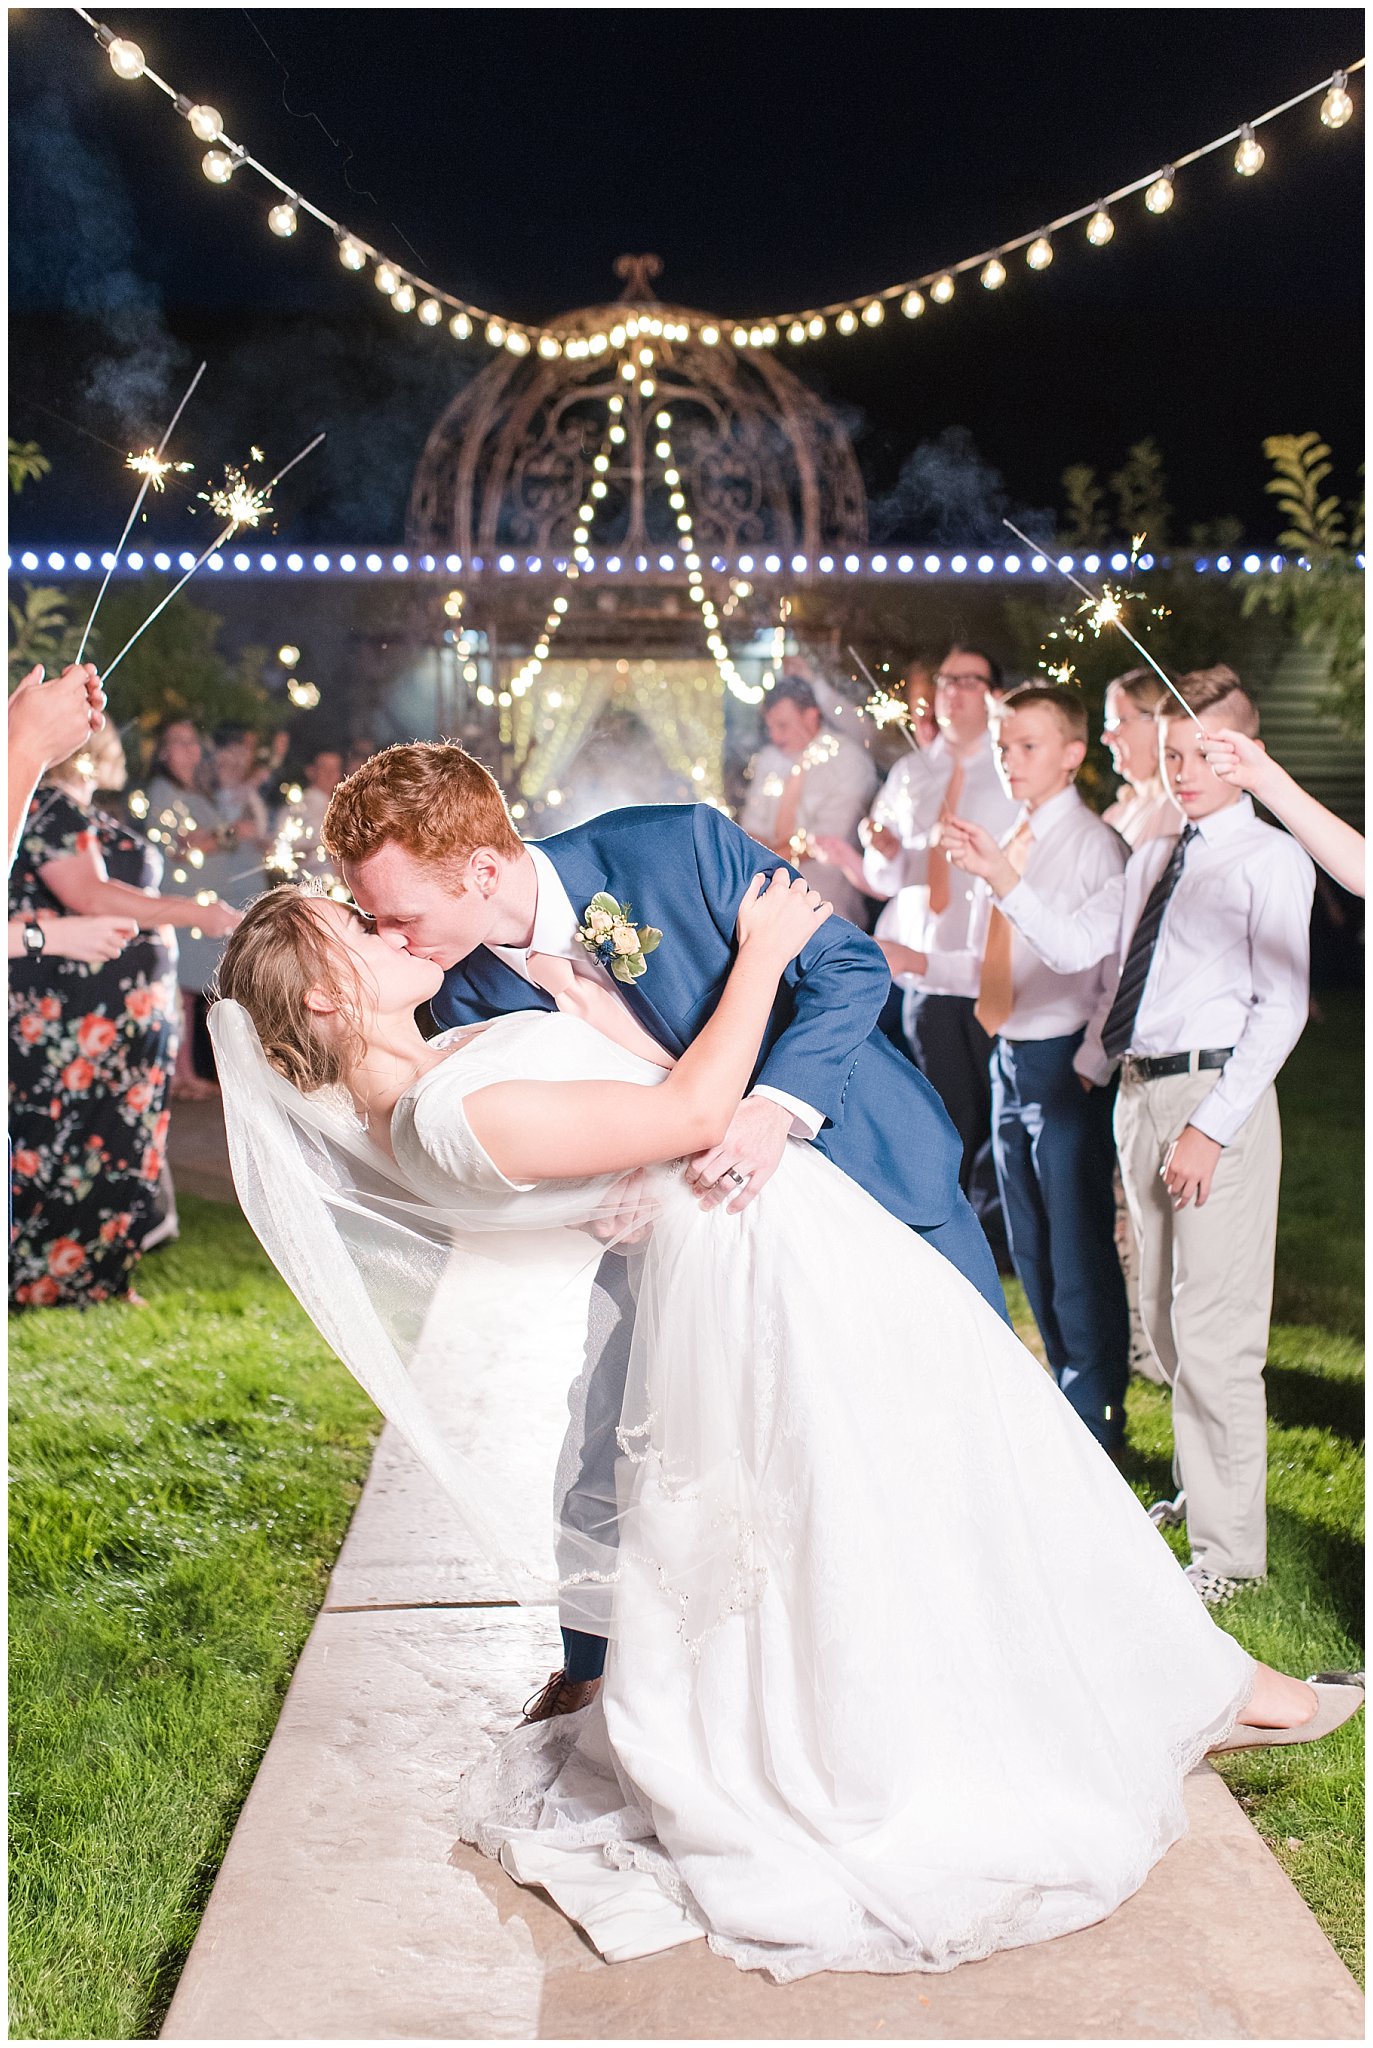 Bride and groom dip and kiss during romantic sparkler exit sendoff | Top Utah Wedding and Couples Photos 2019 | Jessie and Dallin Photography